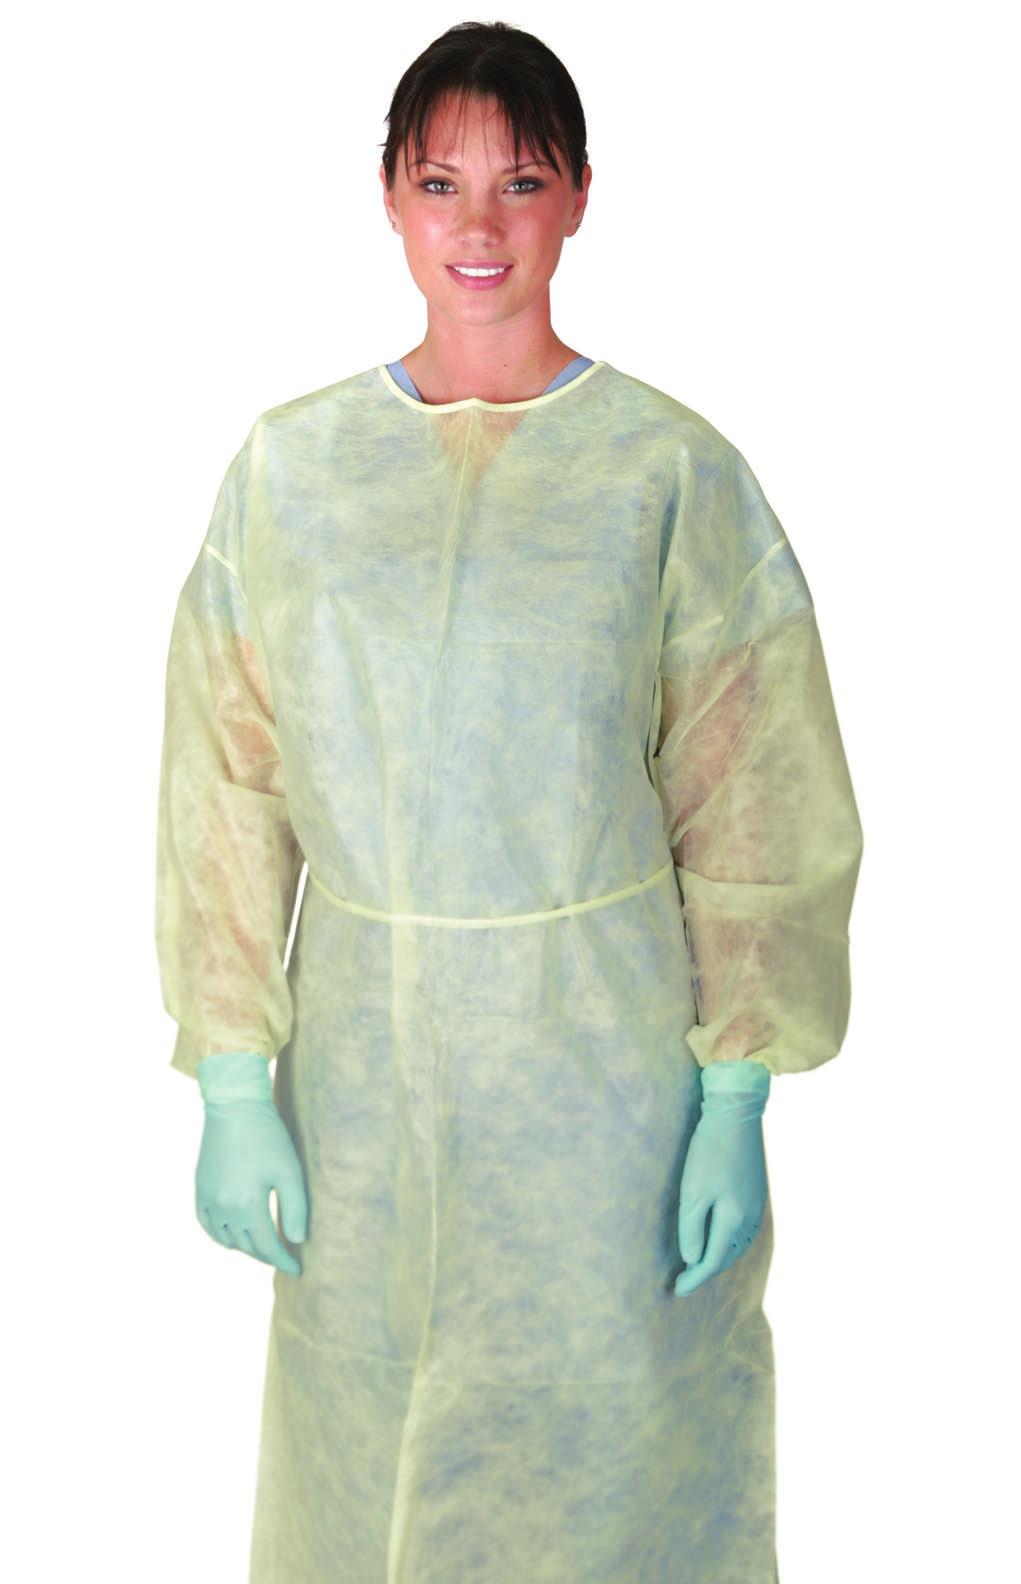 Isolation Gowns The gowns on this page are recommended as: Cover gowns Standard isolation/nursing gowns Visitor gowns Medline s Classic, Fluid-Resistant Multi-Ply Gowns are breathable, flexible and